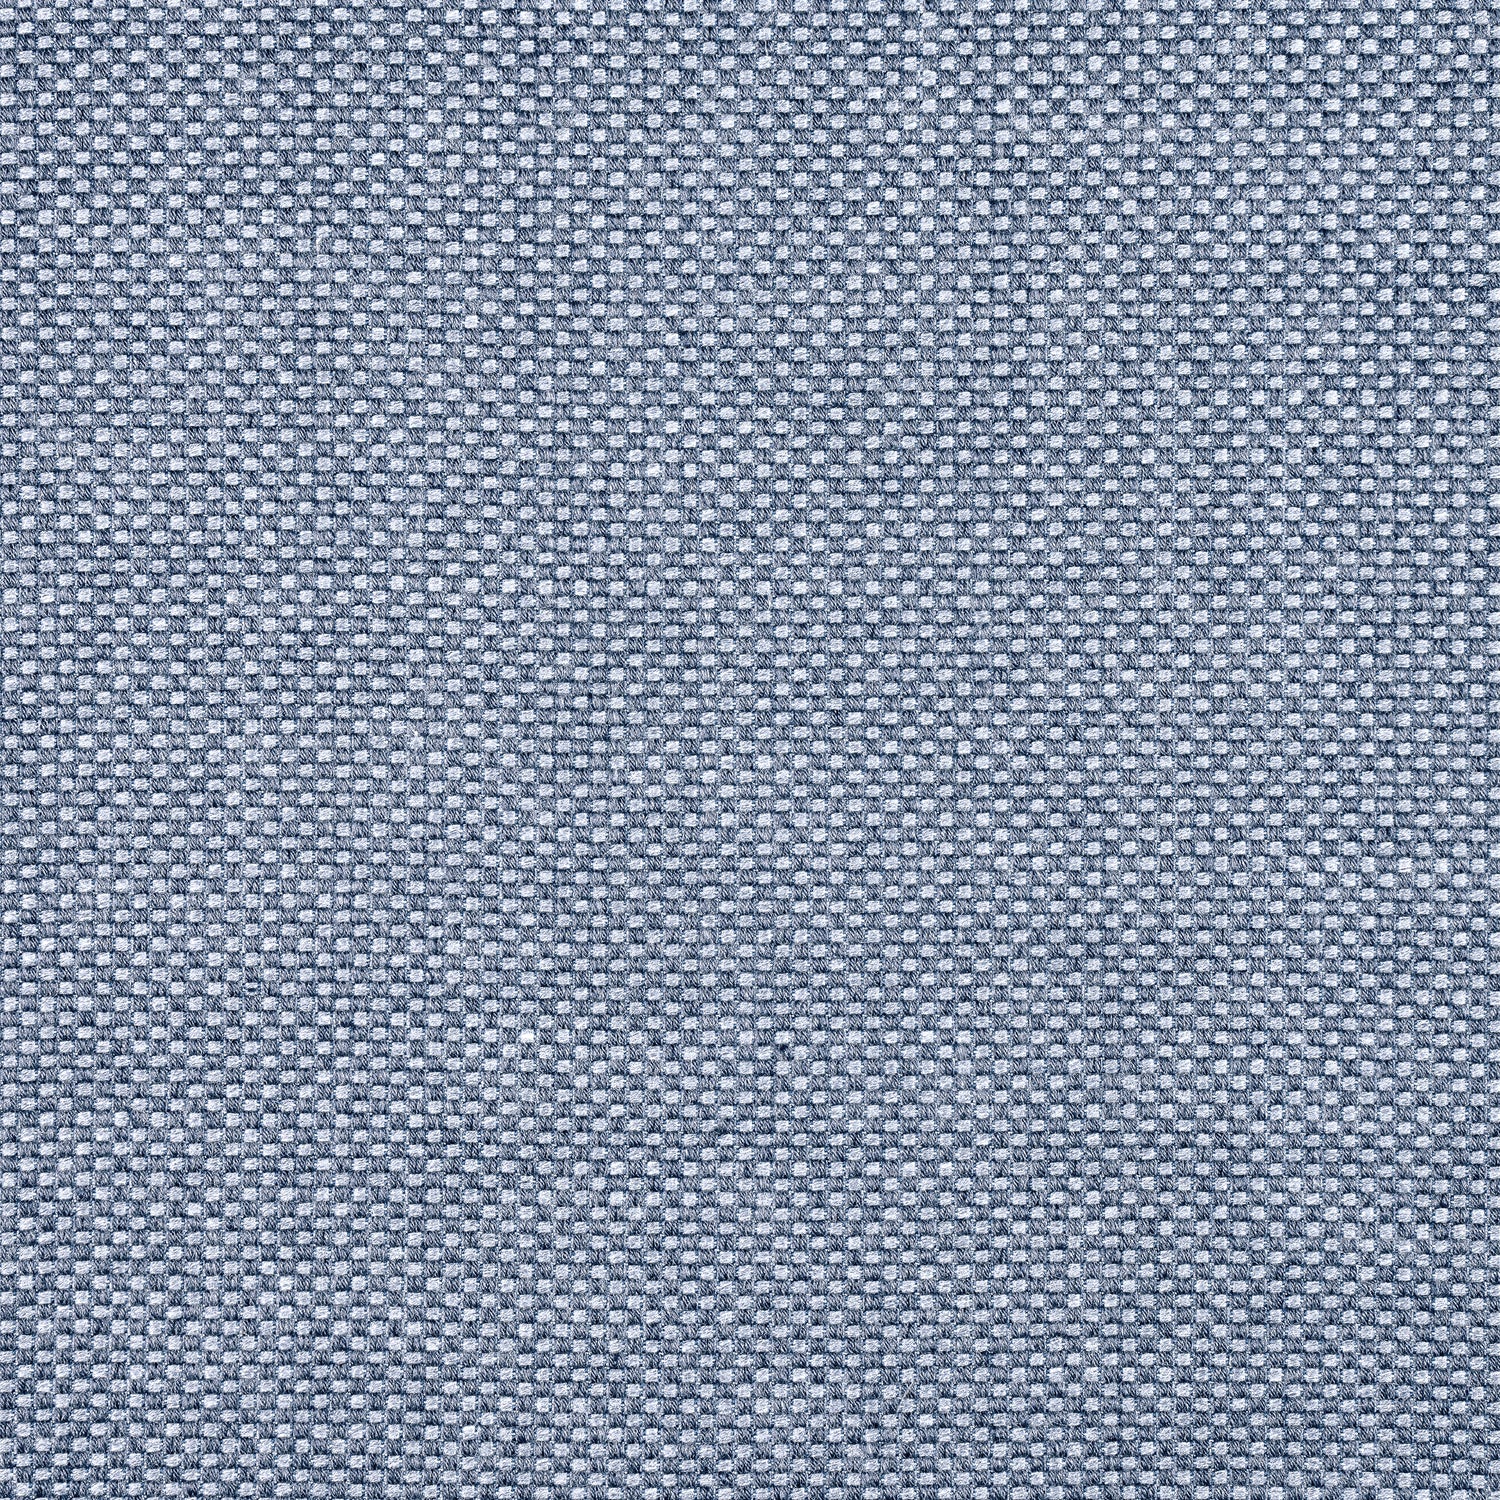 Ravenna fabric in marine color - pattern number W8615 - by Thibaut in the Villa Textures collection